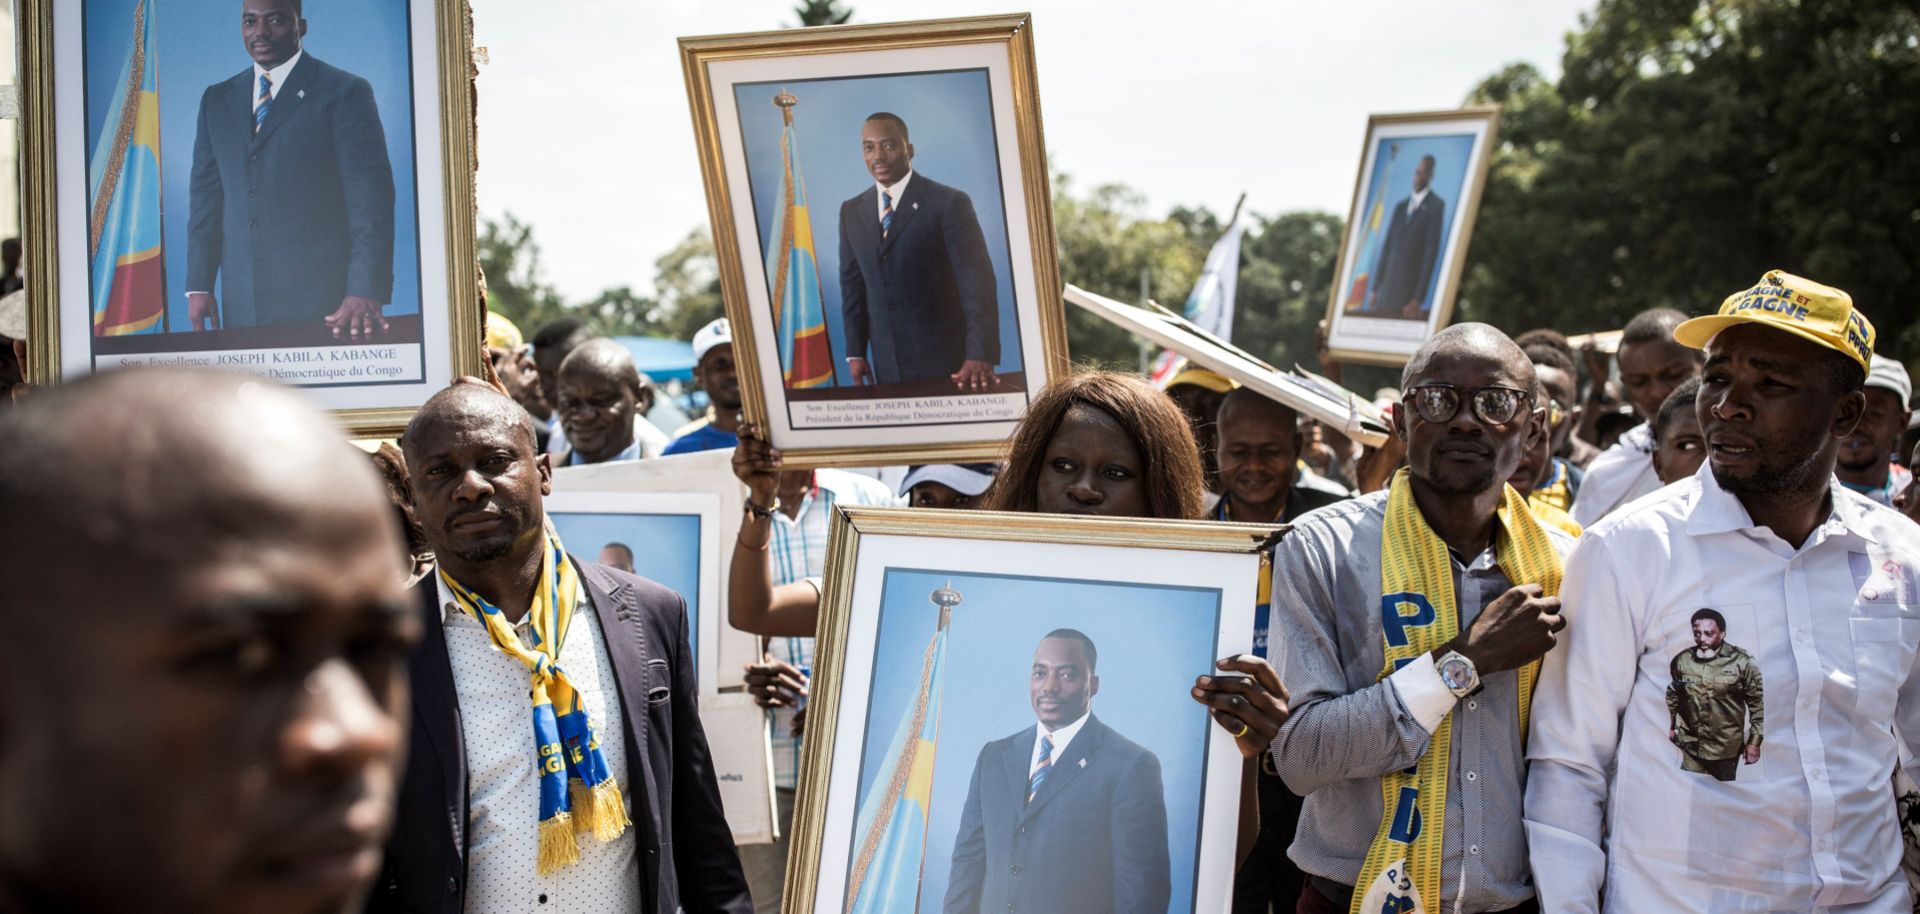 People hold up portraits of the Democratic Republic of the Congo’s former president, Joseph Kabila, as they arrive to attend newly elected President Felix Tshisekedi's inauguration on Jan. 24, 2018.